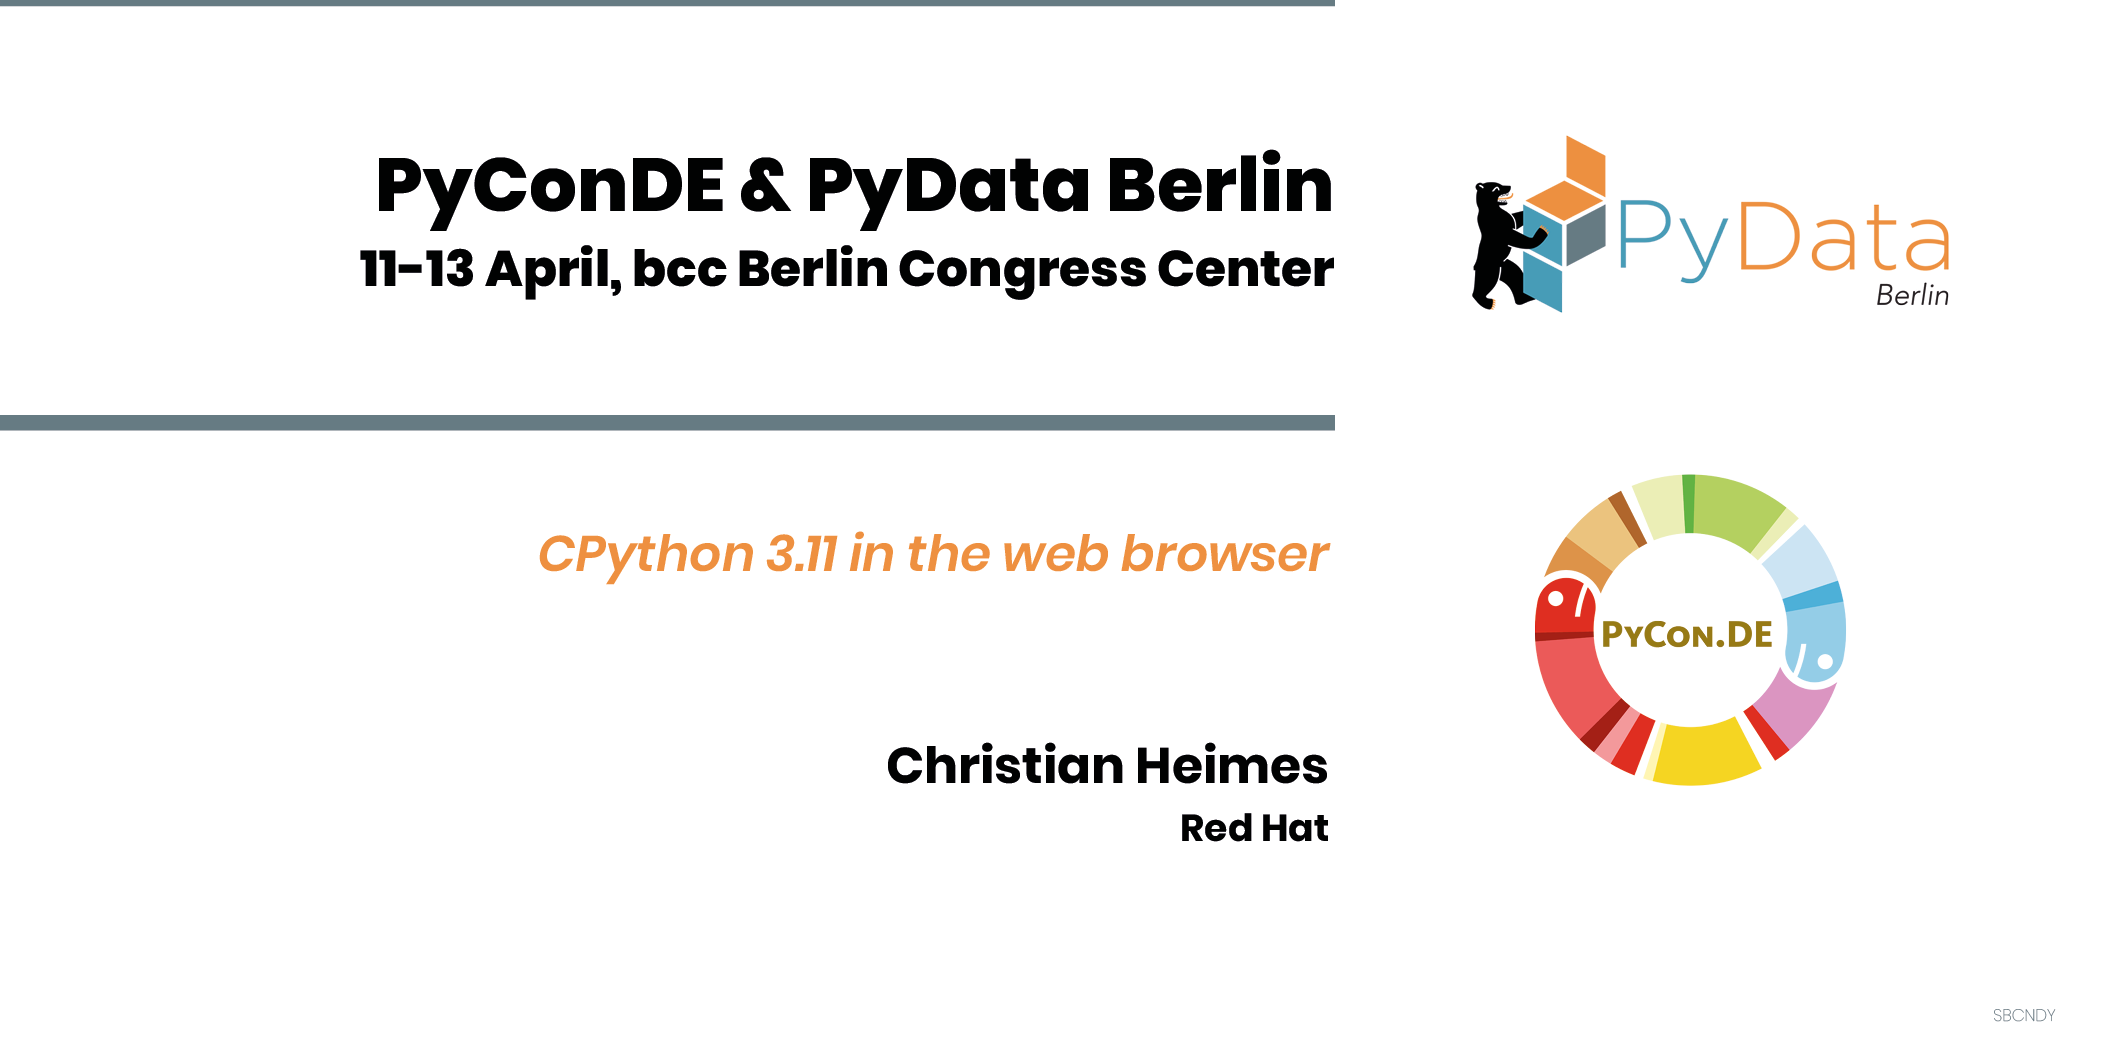 Python 3.11 in the Web Browser - A Journey Christian Heimes PyConDE & PyDataBerlin 2022 conference